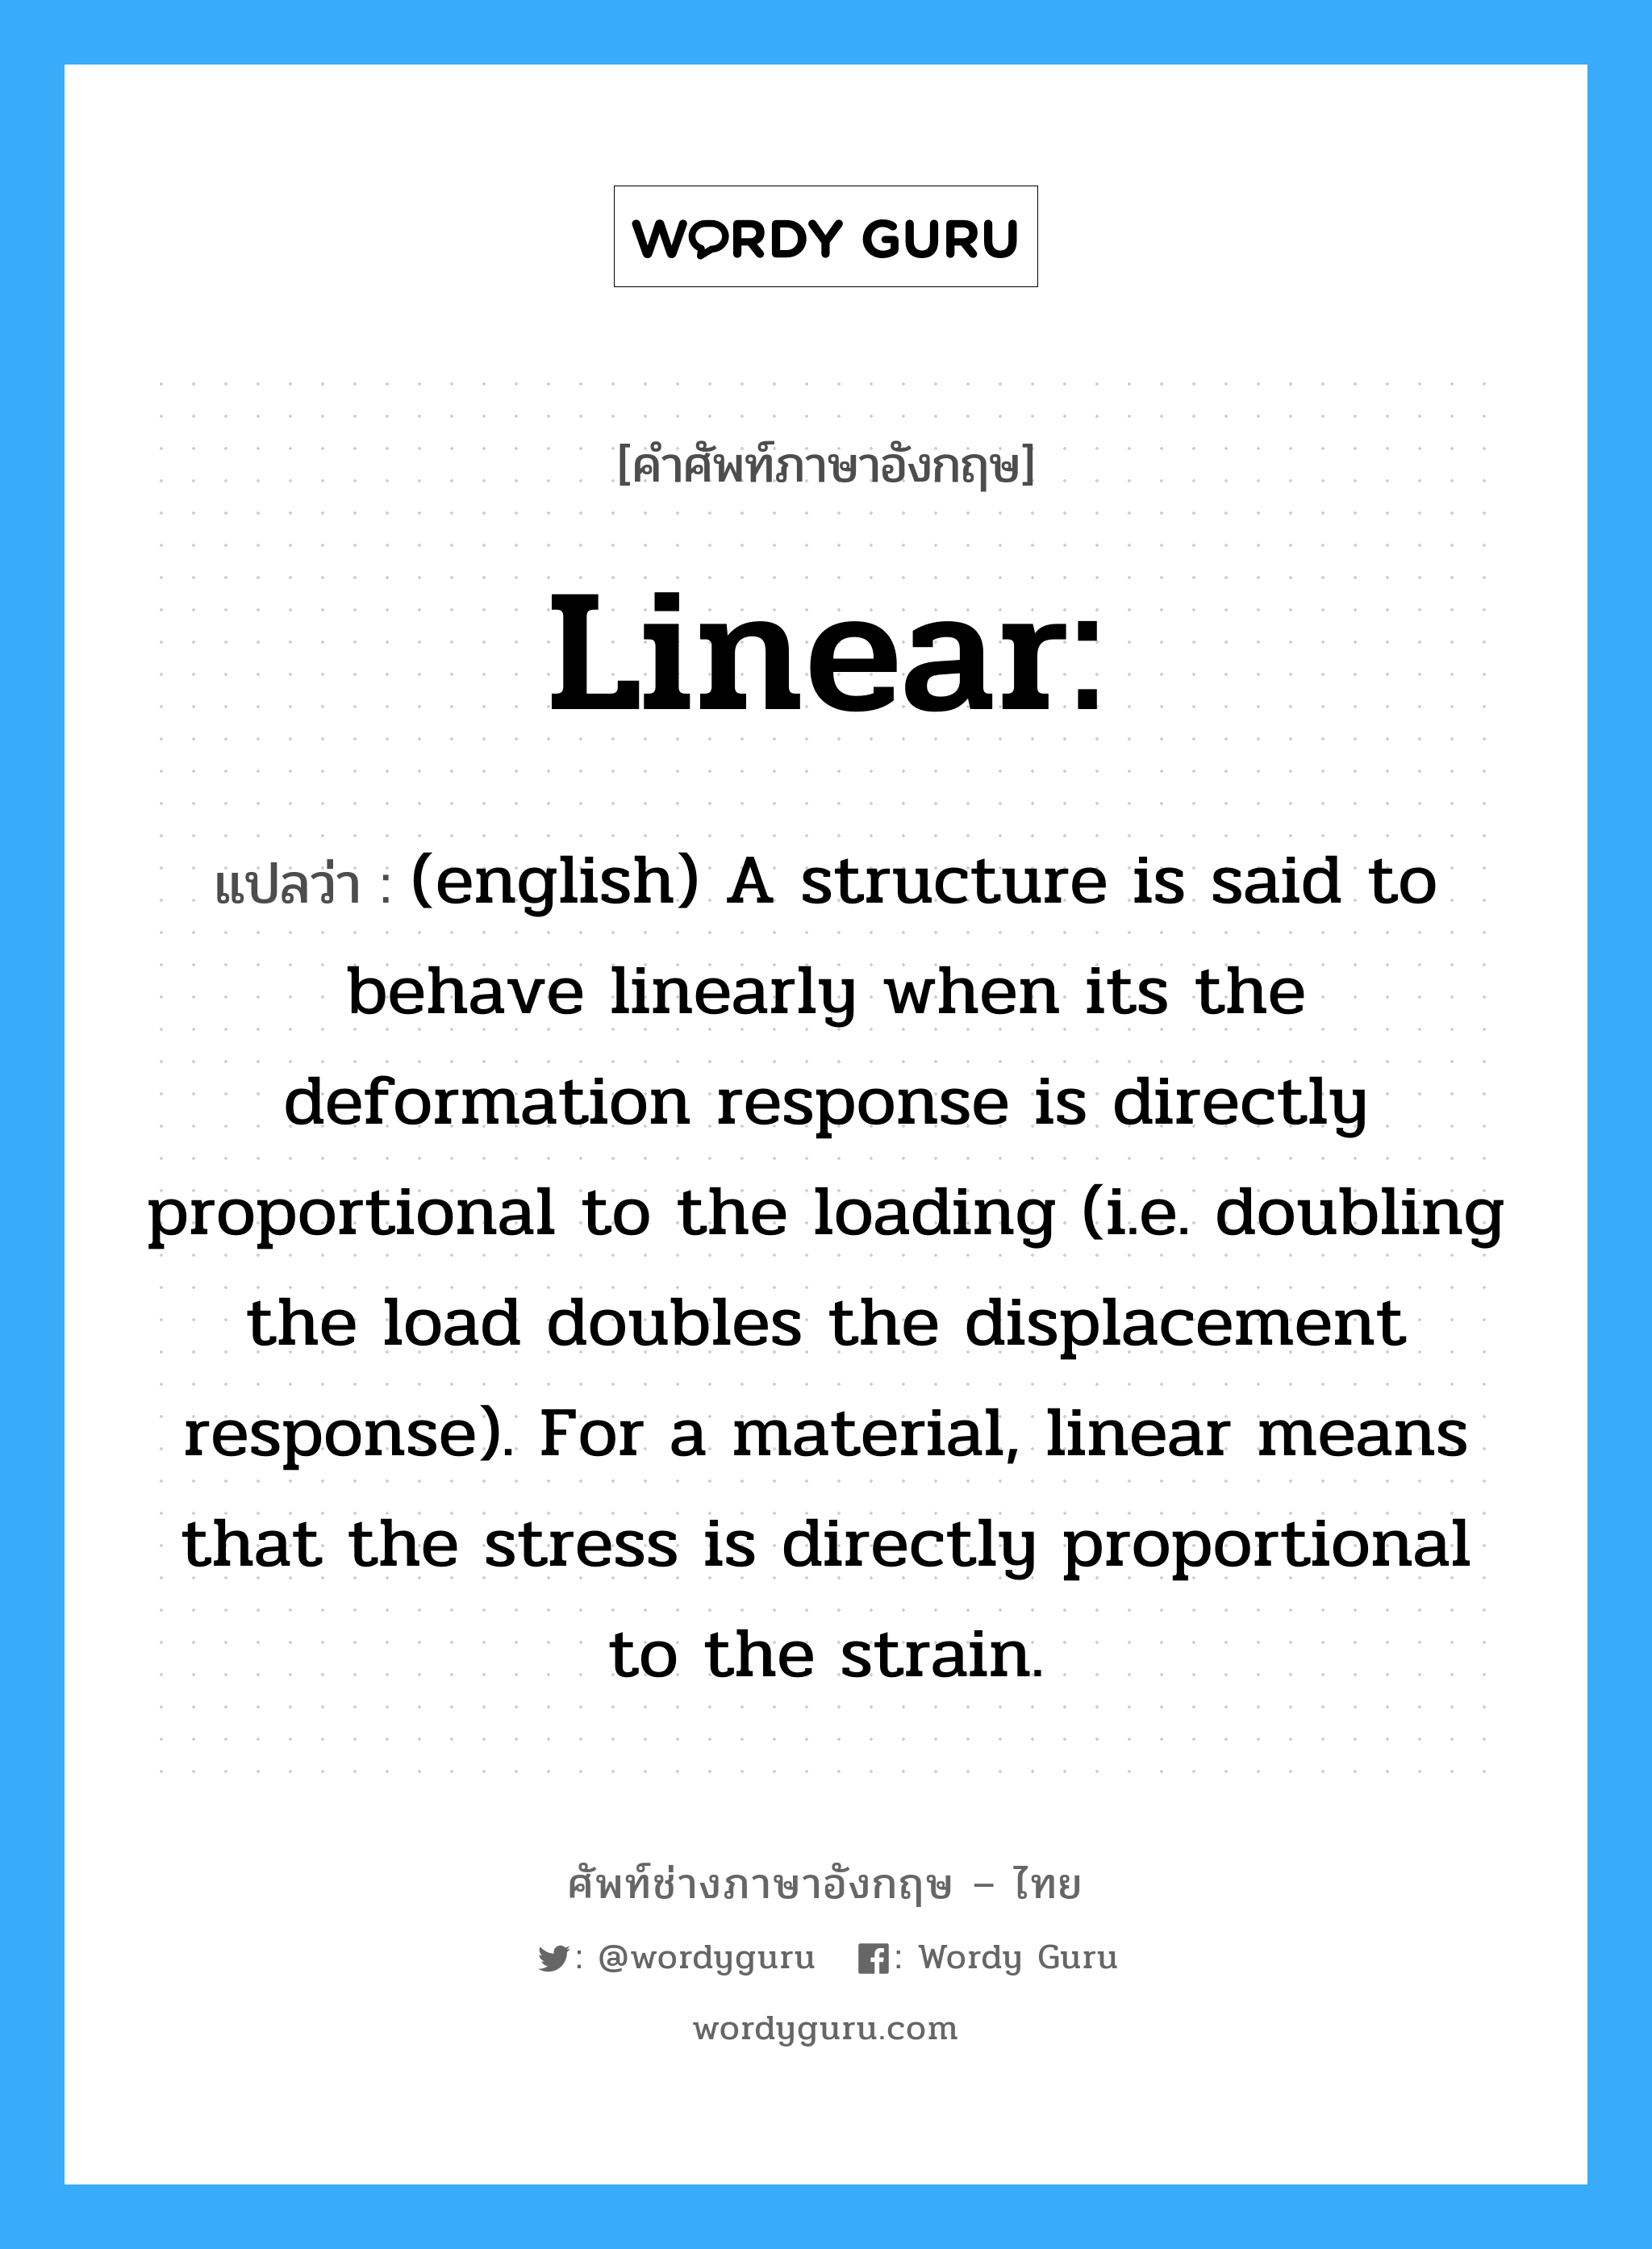 (english) A structure is said to behave linearly when its the deformation response is directly proportional to the loading (i.e. doubling the load doubles the displacement response). For a material, linear means that the stress is directly proportional to the strain. ภาษาอังกฤษ?, คำศัพท์ช่างภาษาอังกฤษ - ไทย (english) A structure is said to behave linearly when its the deformation response is directly proportional to the loading (i.e. doubling the load doubles the displacement response). For a material, linear means that the stress is directly proportional to the strain. คำศัพท์ภาษาอังกฤษ (english) A structure is said to behave linearly when its the deformation response is directly proportional to the loading (i.e. doubling the load doubles the displacement response). For a material, linear means that the stress is directly proportional to the strain. แปลว่า Linear: